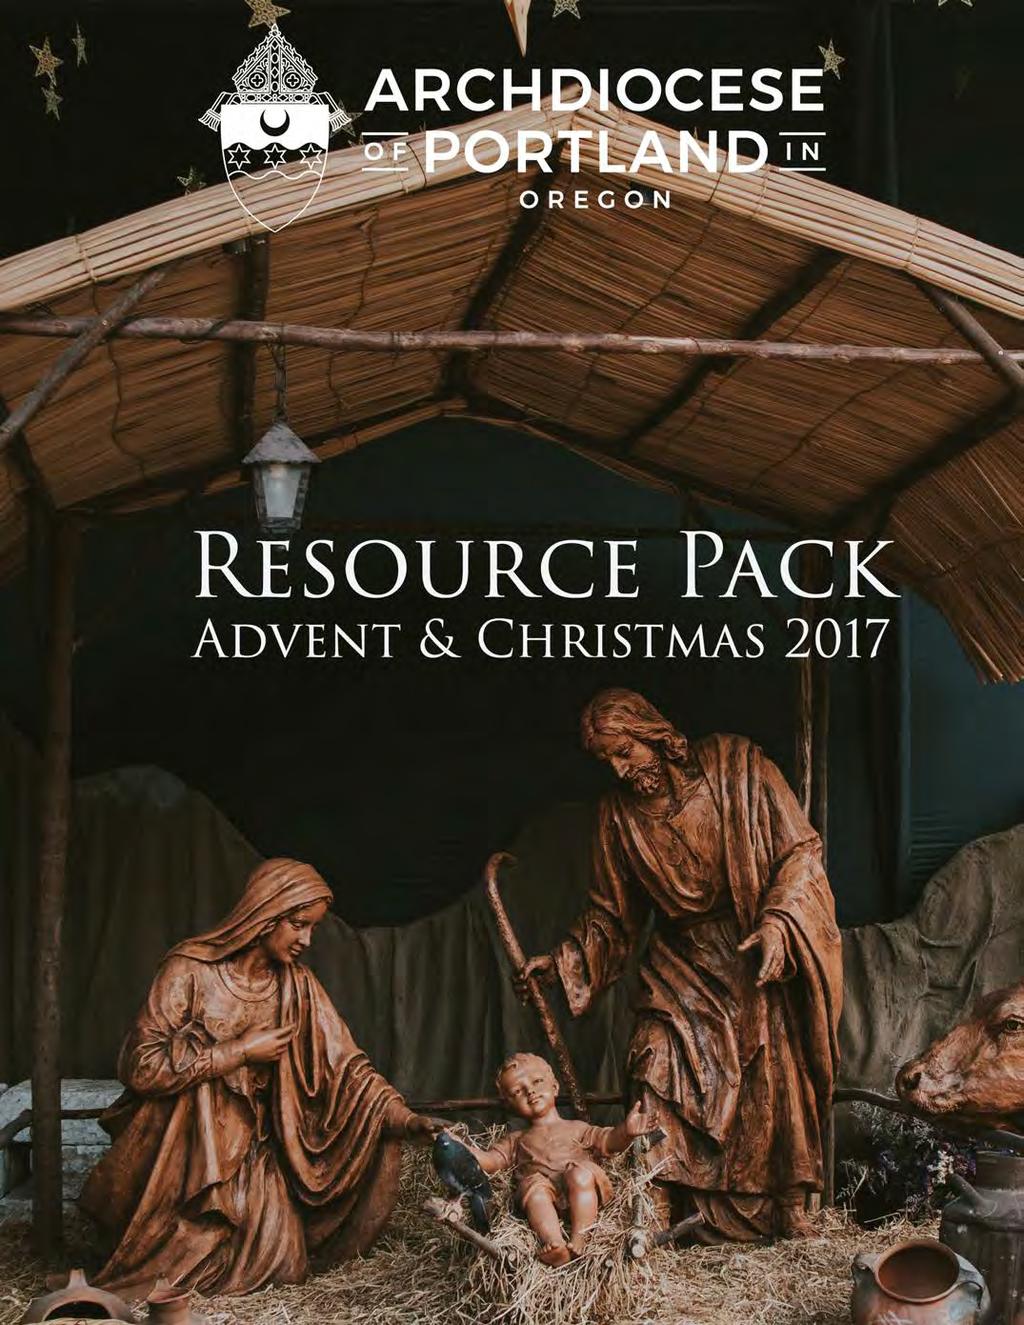 CHAPTER 6 Advent - Christmas 2017 Resource Pack The Advent-Christmas 2017 Resource Pack brings together some of the resources available to parishes during this beautiful season in which we prepare